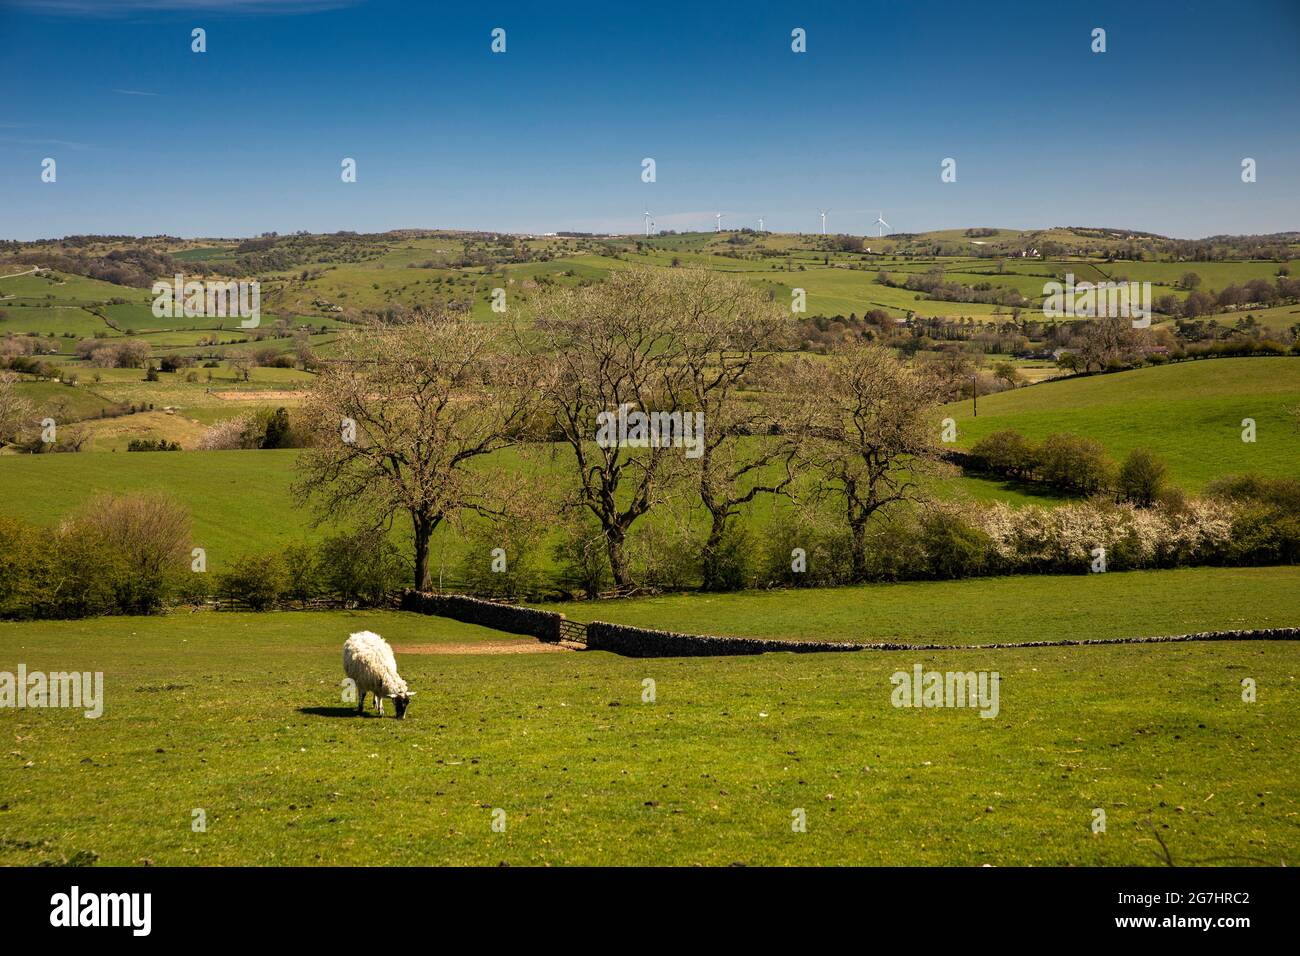 UK, England, Derbyshire, Tissington, Limestone Way, view over Bletch Brook valley to Parwich, Stock Photo